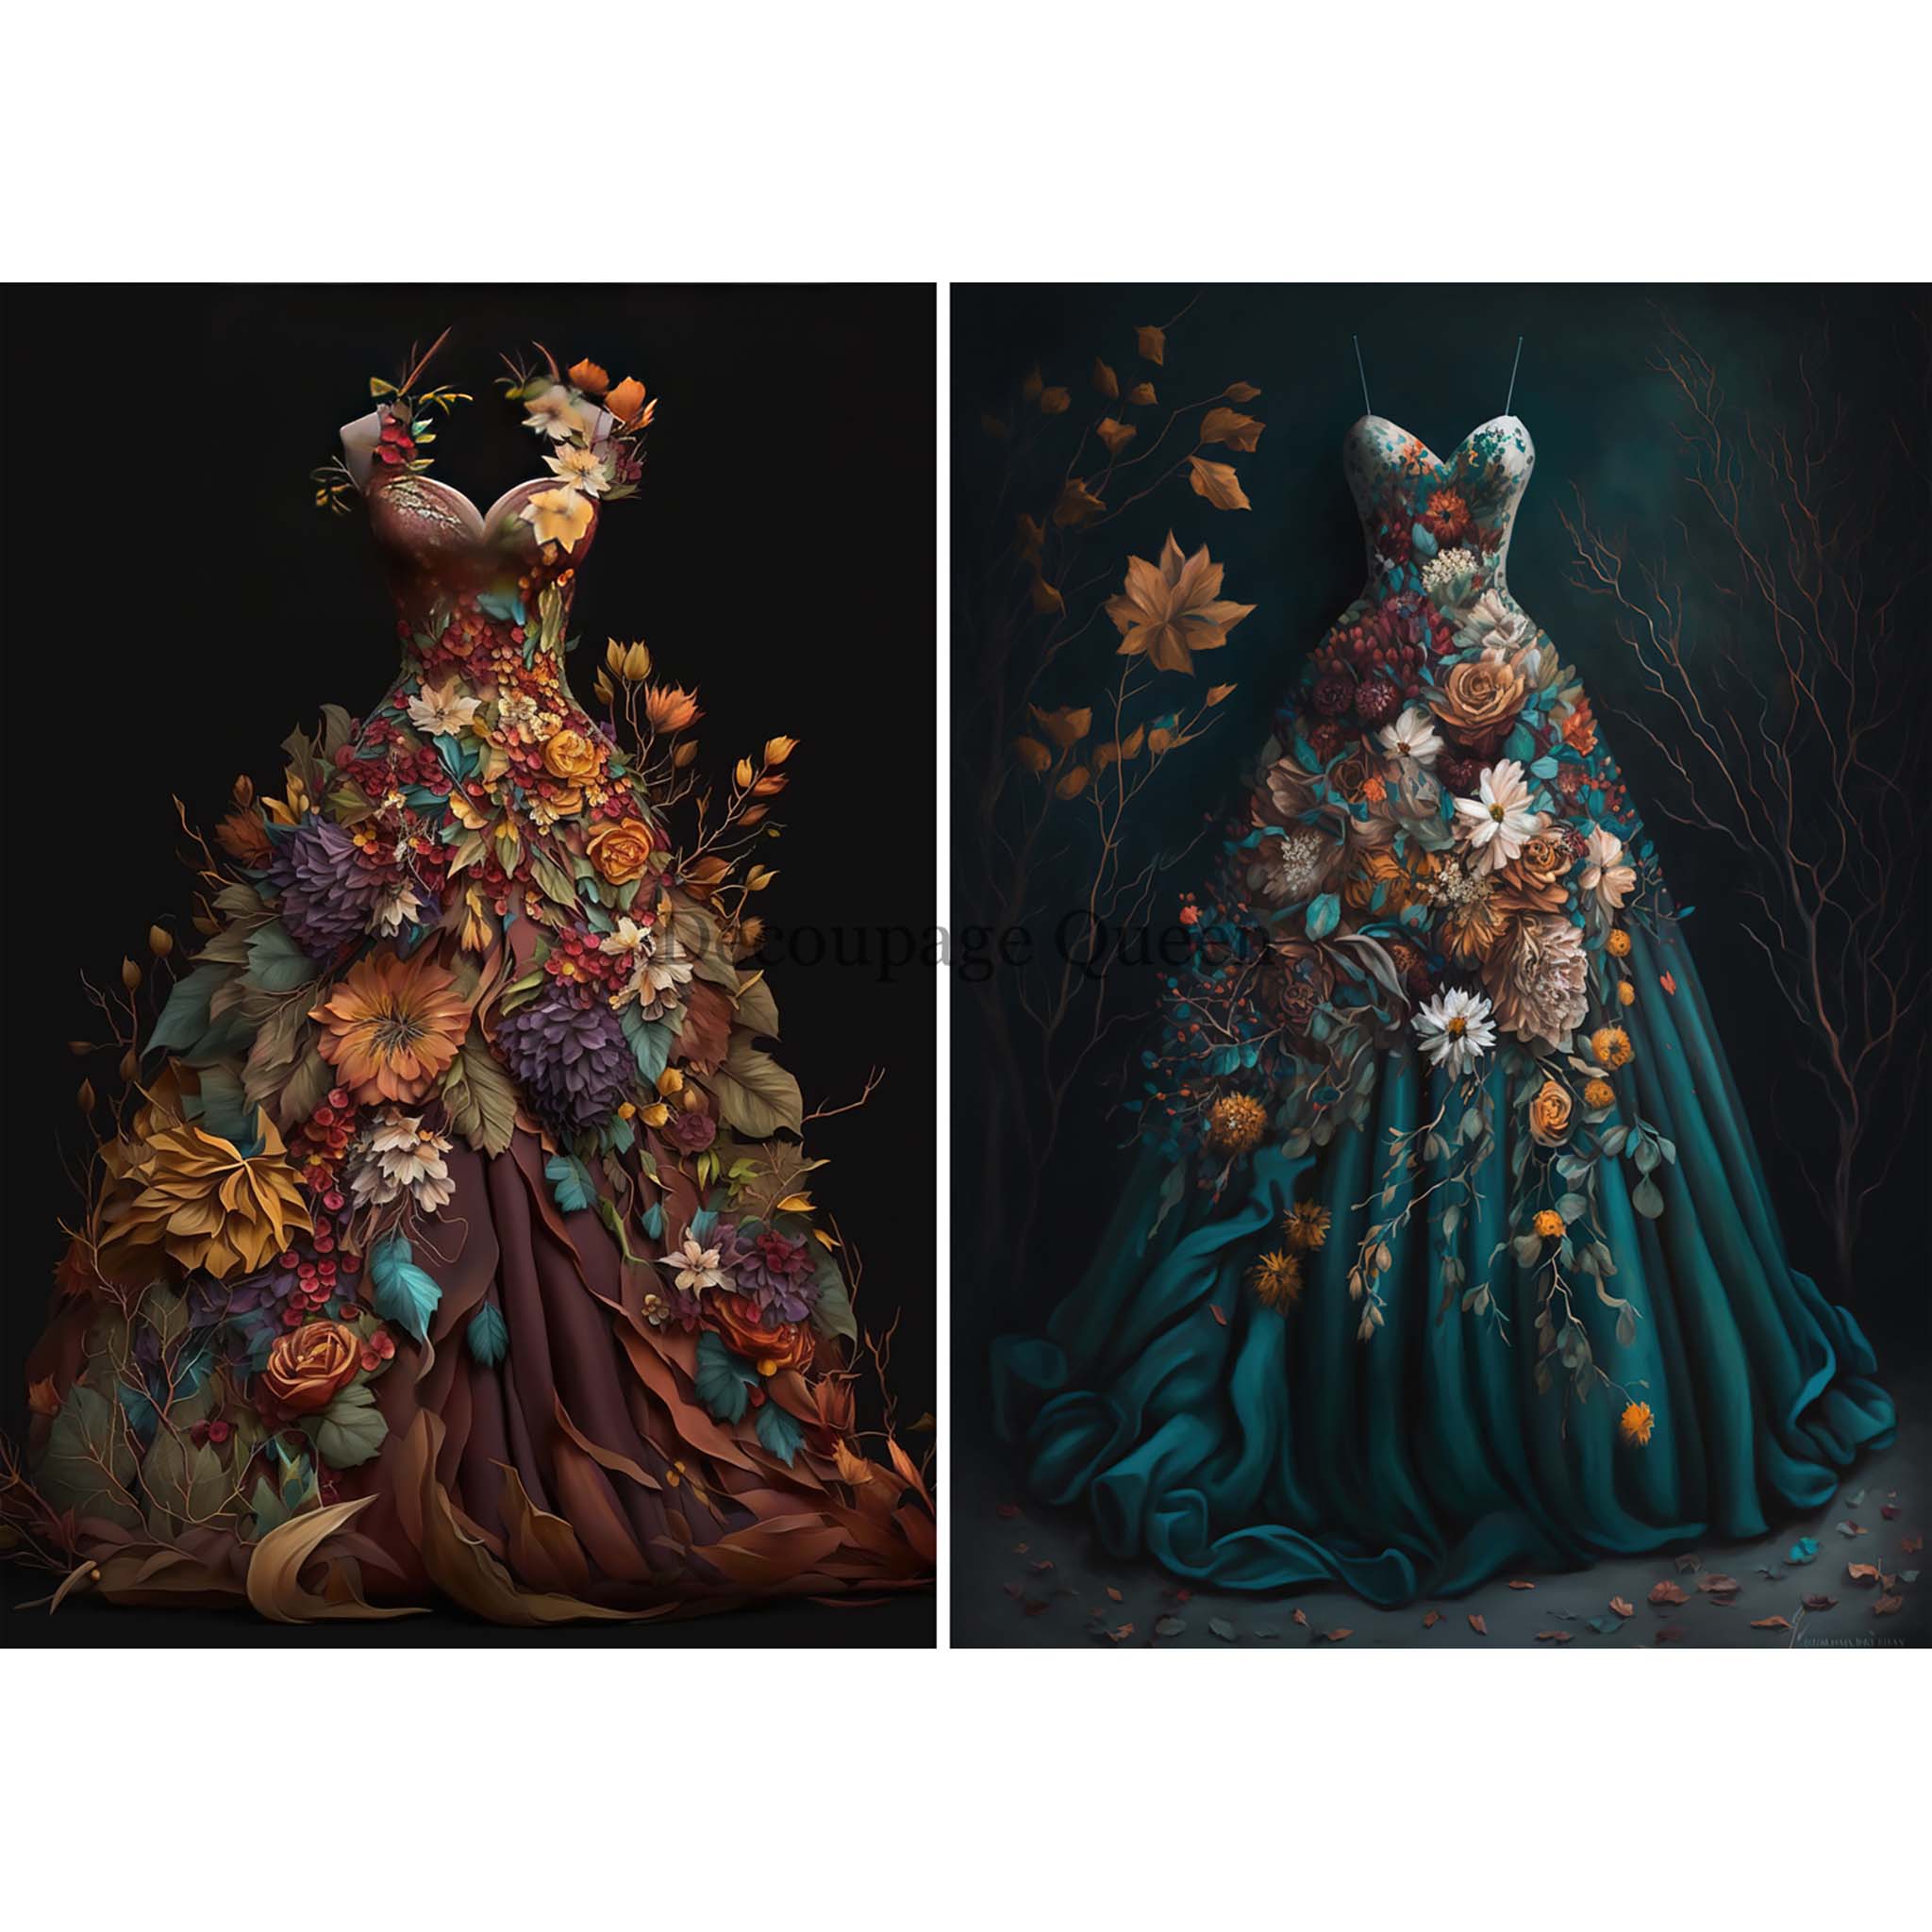 A4 rice paper design that features 2 evening gowns. The gown on the left is maroon and orange and the gown on the right is dark teal. Both are covered in autumn flowers and foliage. White borders are on the top and bottom.